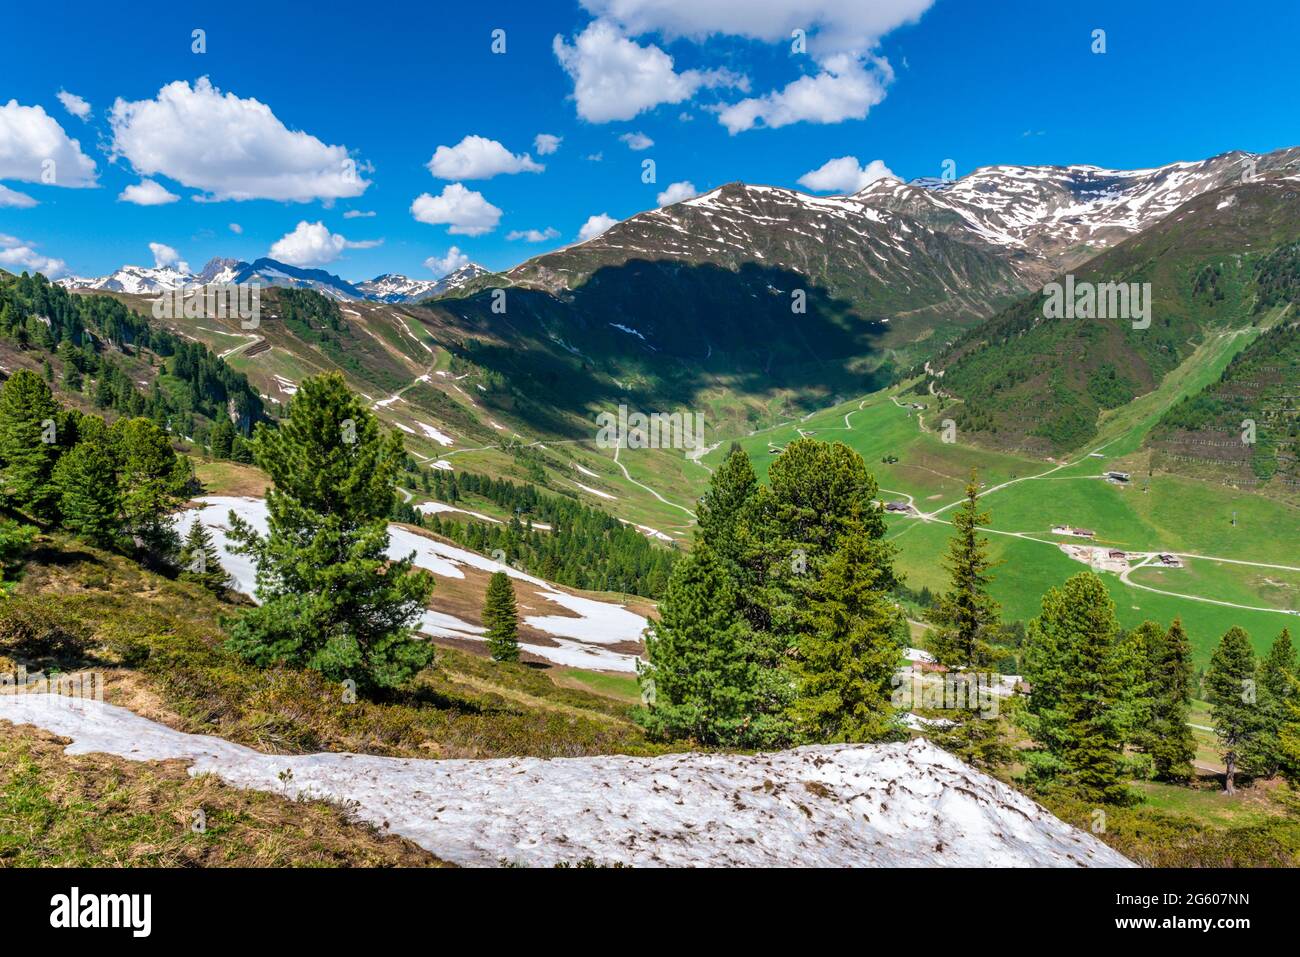 landscape with trees, snow, grass, roads and blue sky in Austria, Zillertal Stock Photo